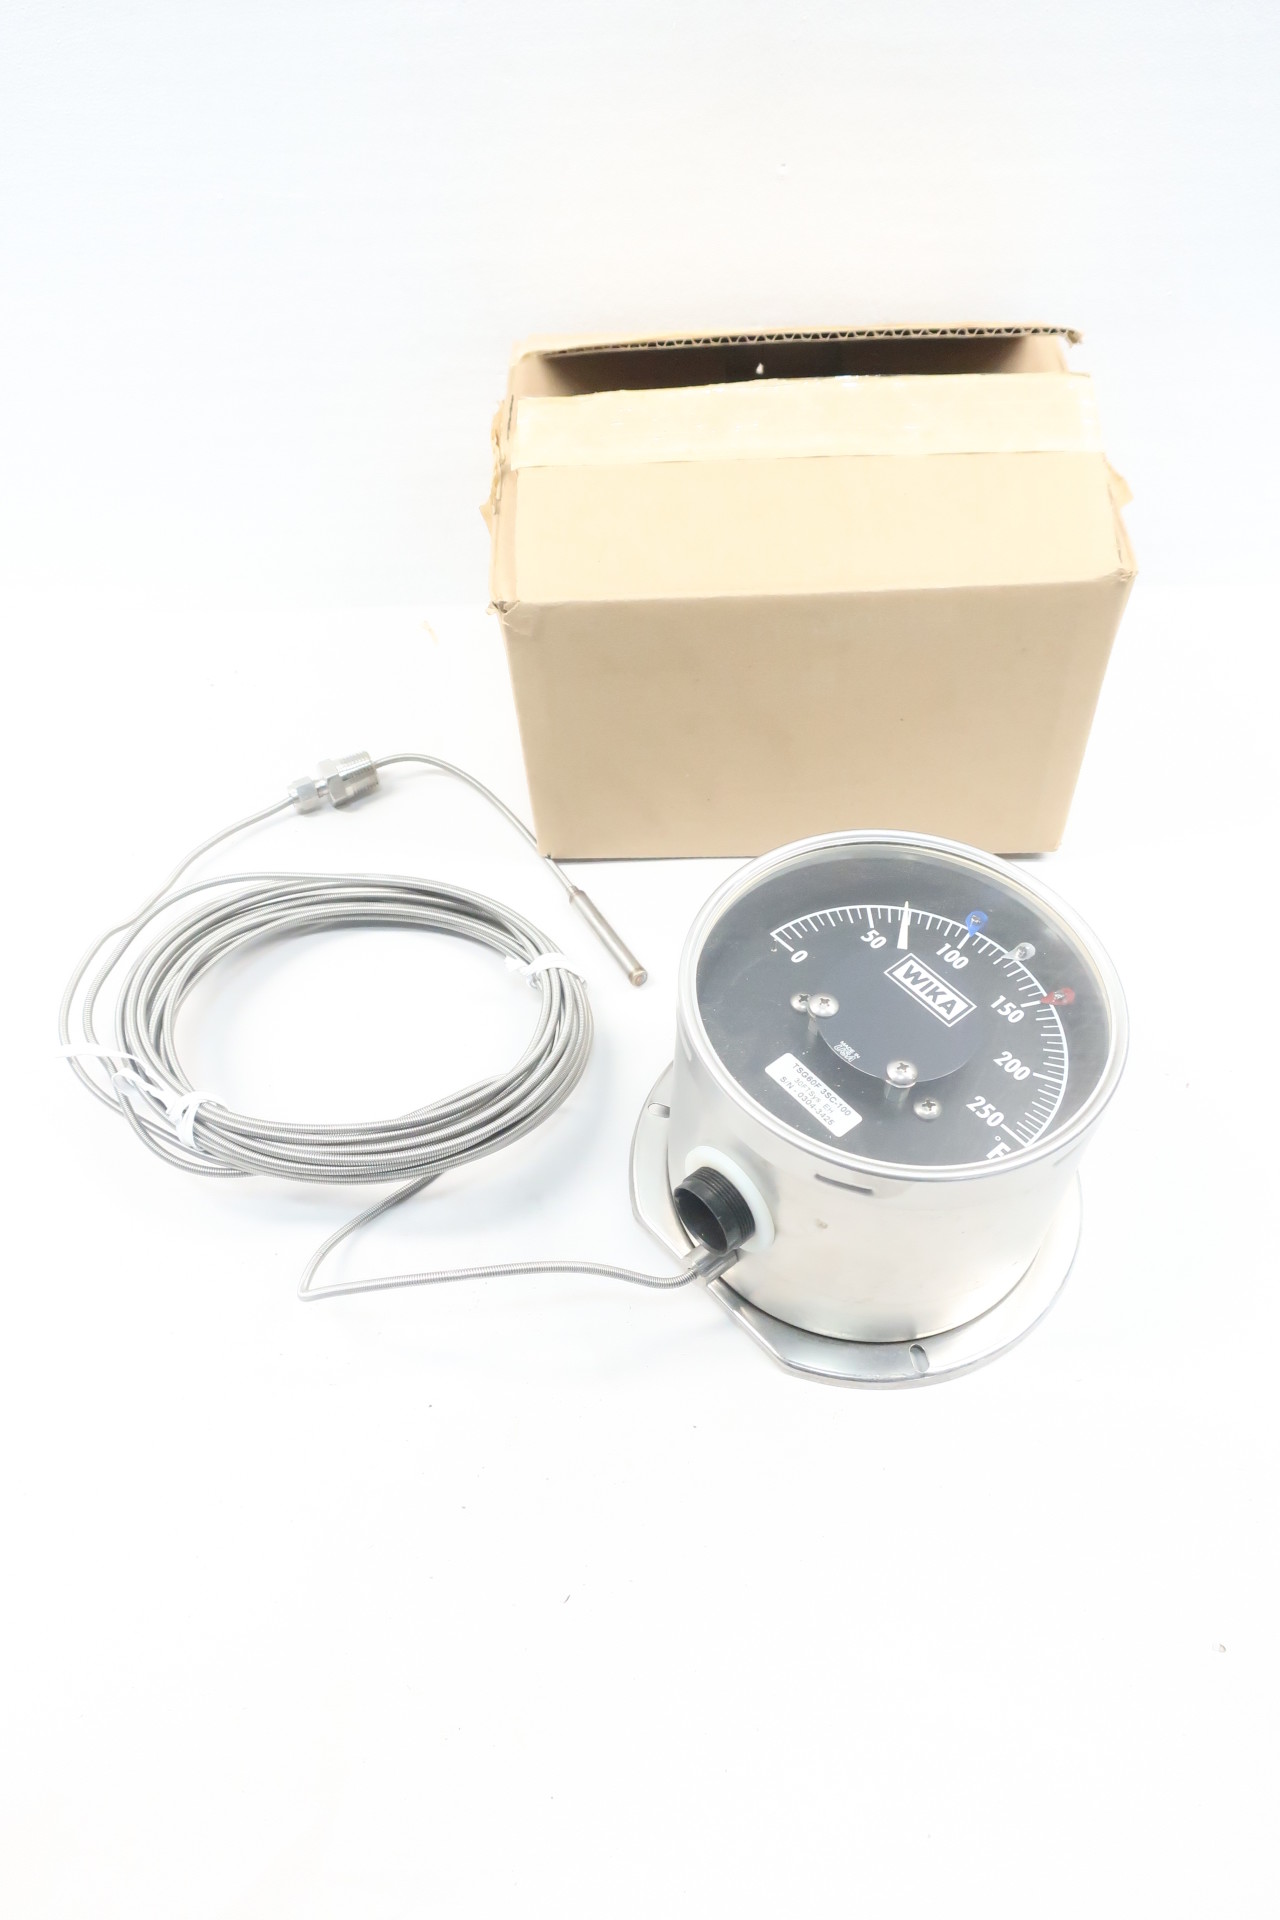 Trerice V80341 Dial Thermometer 40 to 150f for sale online 